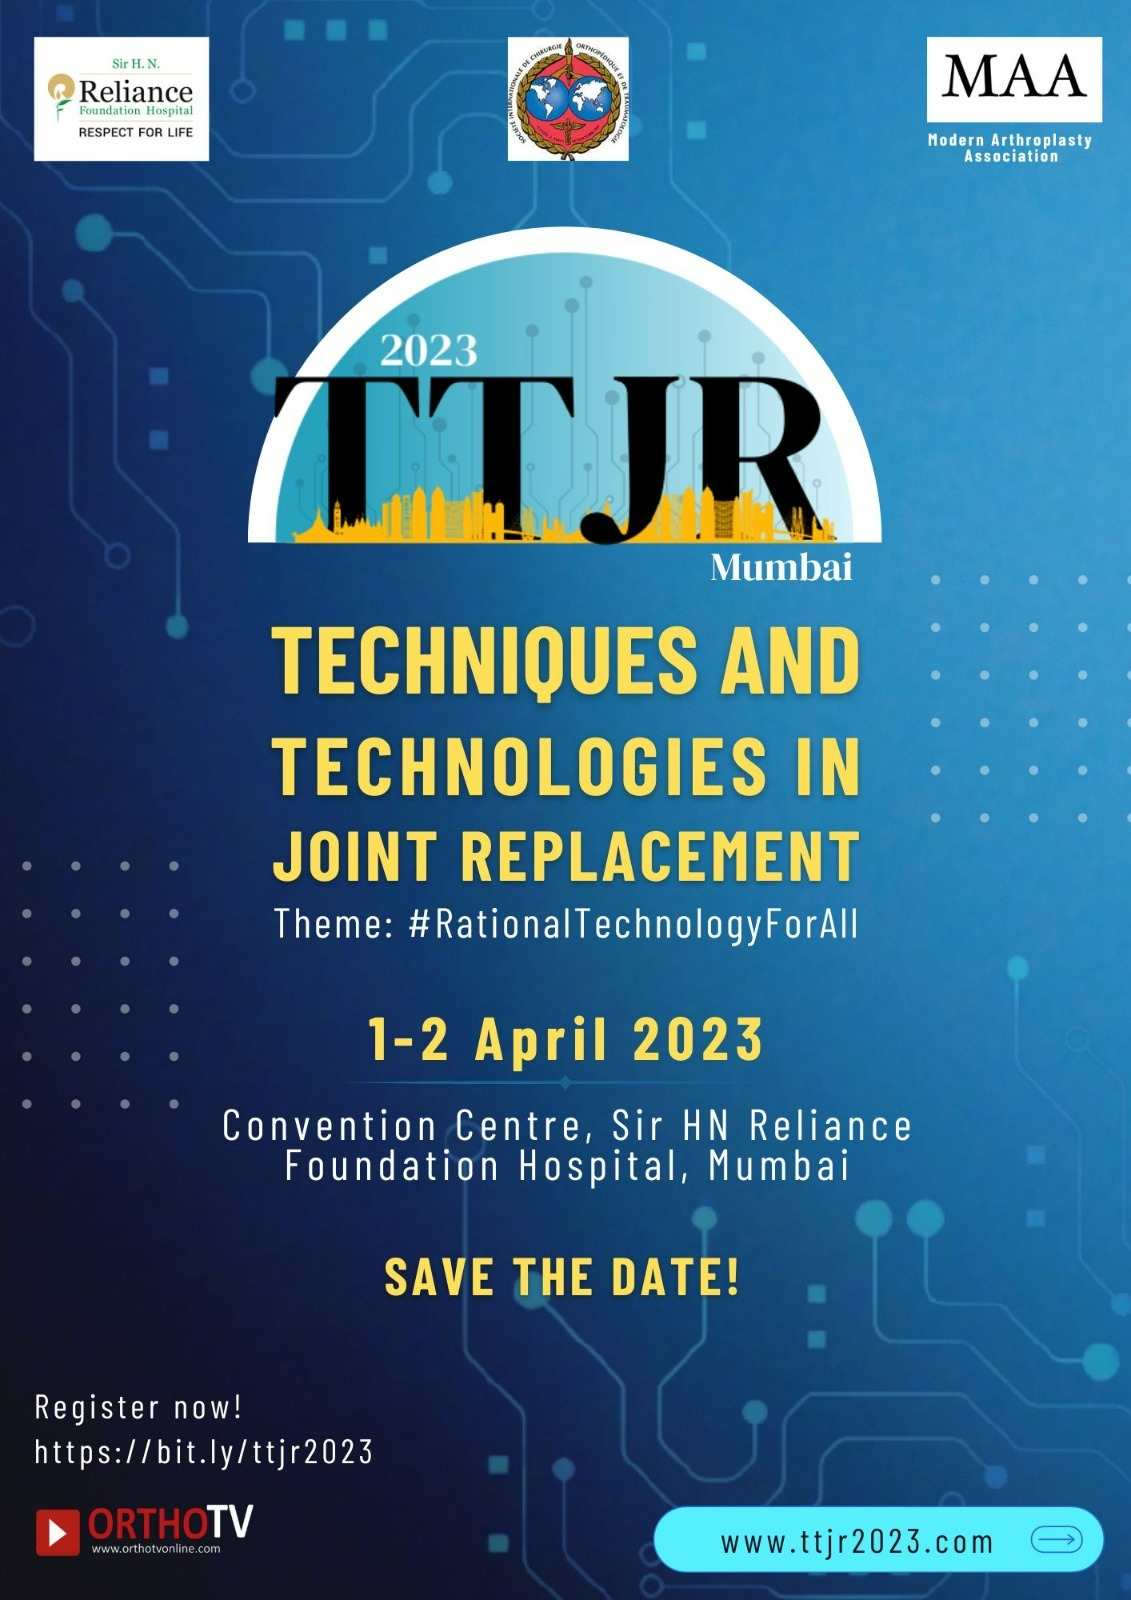 TTJR 2023 Mumbai :Techniques & Technologies in Joint Replacement